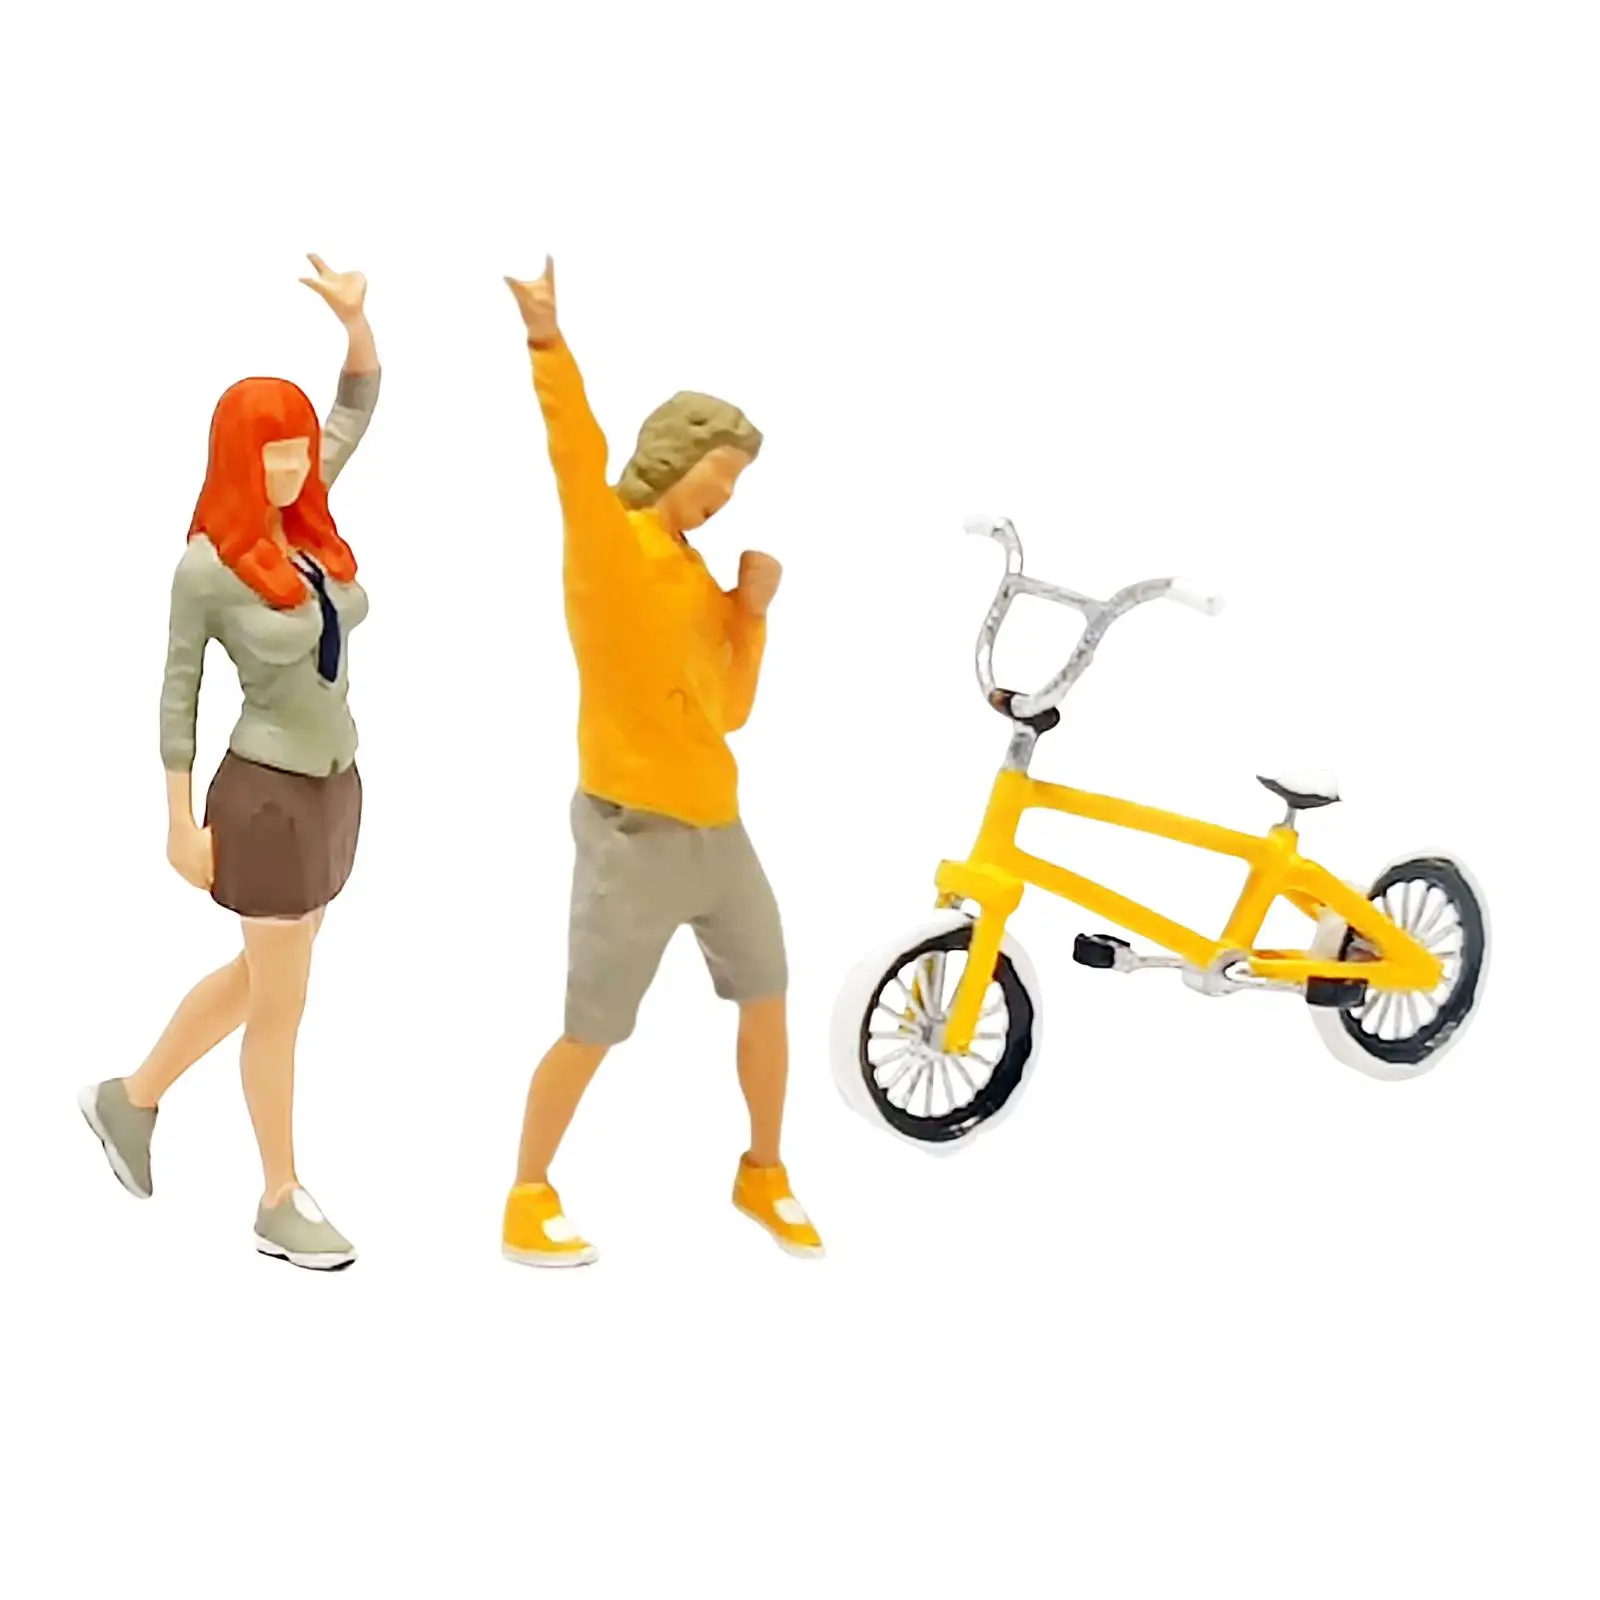 3Pcs 1:64 Women Men Figure with Bike Movie Props Collections Diorama Scenery Decoration images - 6